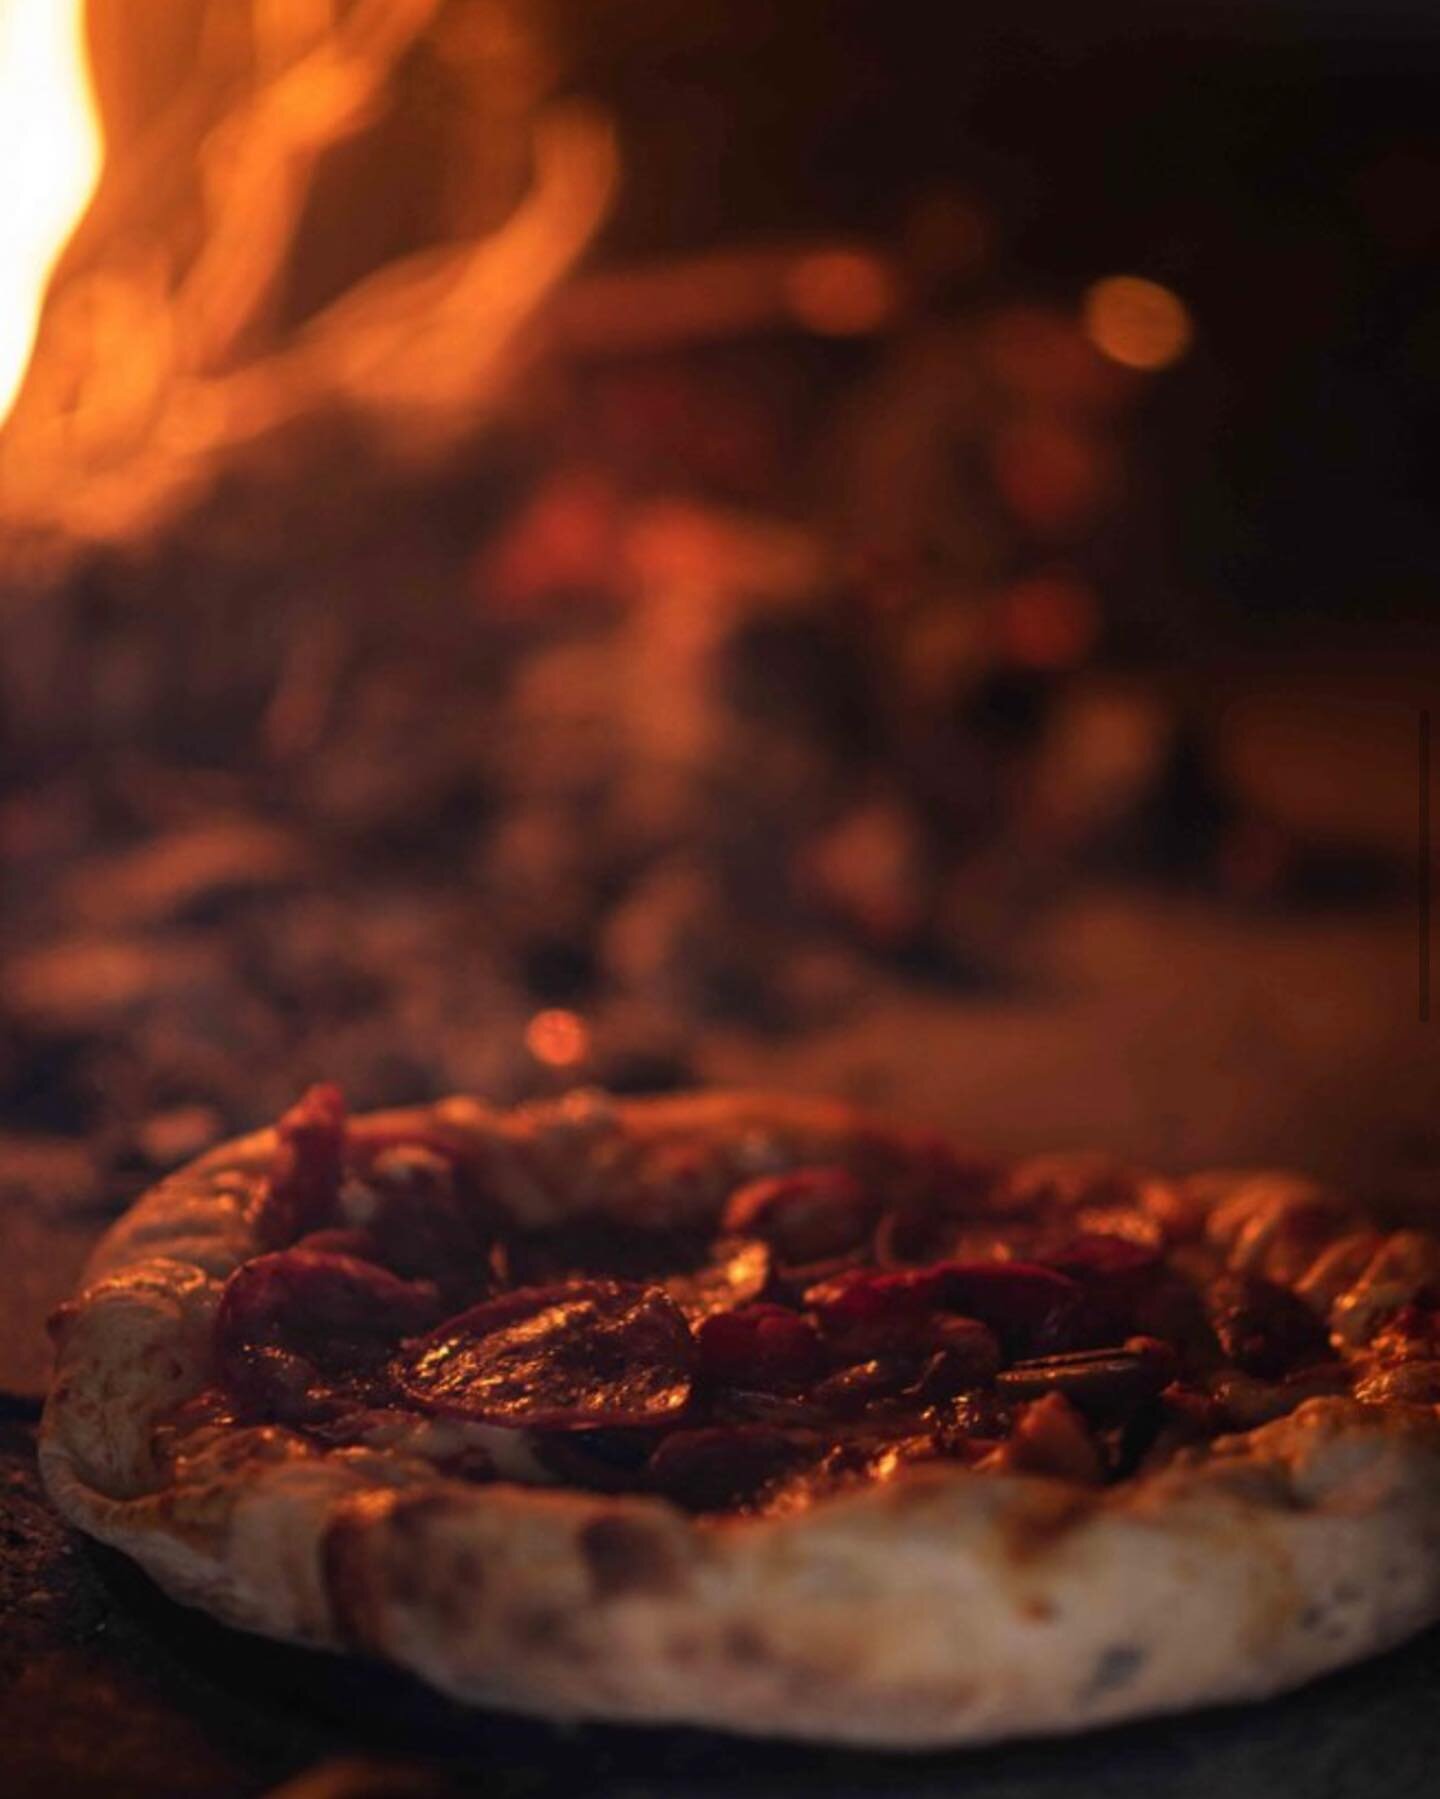 Let us bring you the sensational luxury of woodoven pizza cooked at your place for any occasion. Our team can give you an unrivalled casual dining, party experience. Call now 0459487084 or go to www.lacatering.com.au for more information #woodovenpiz